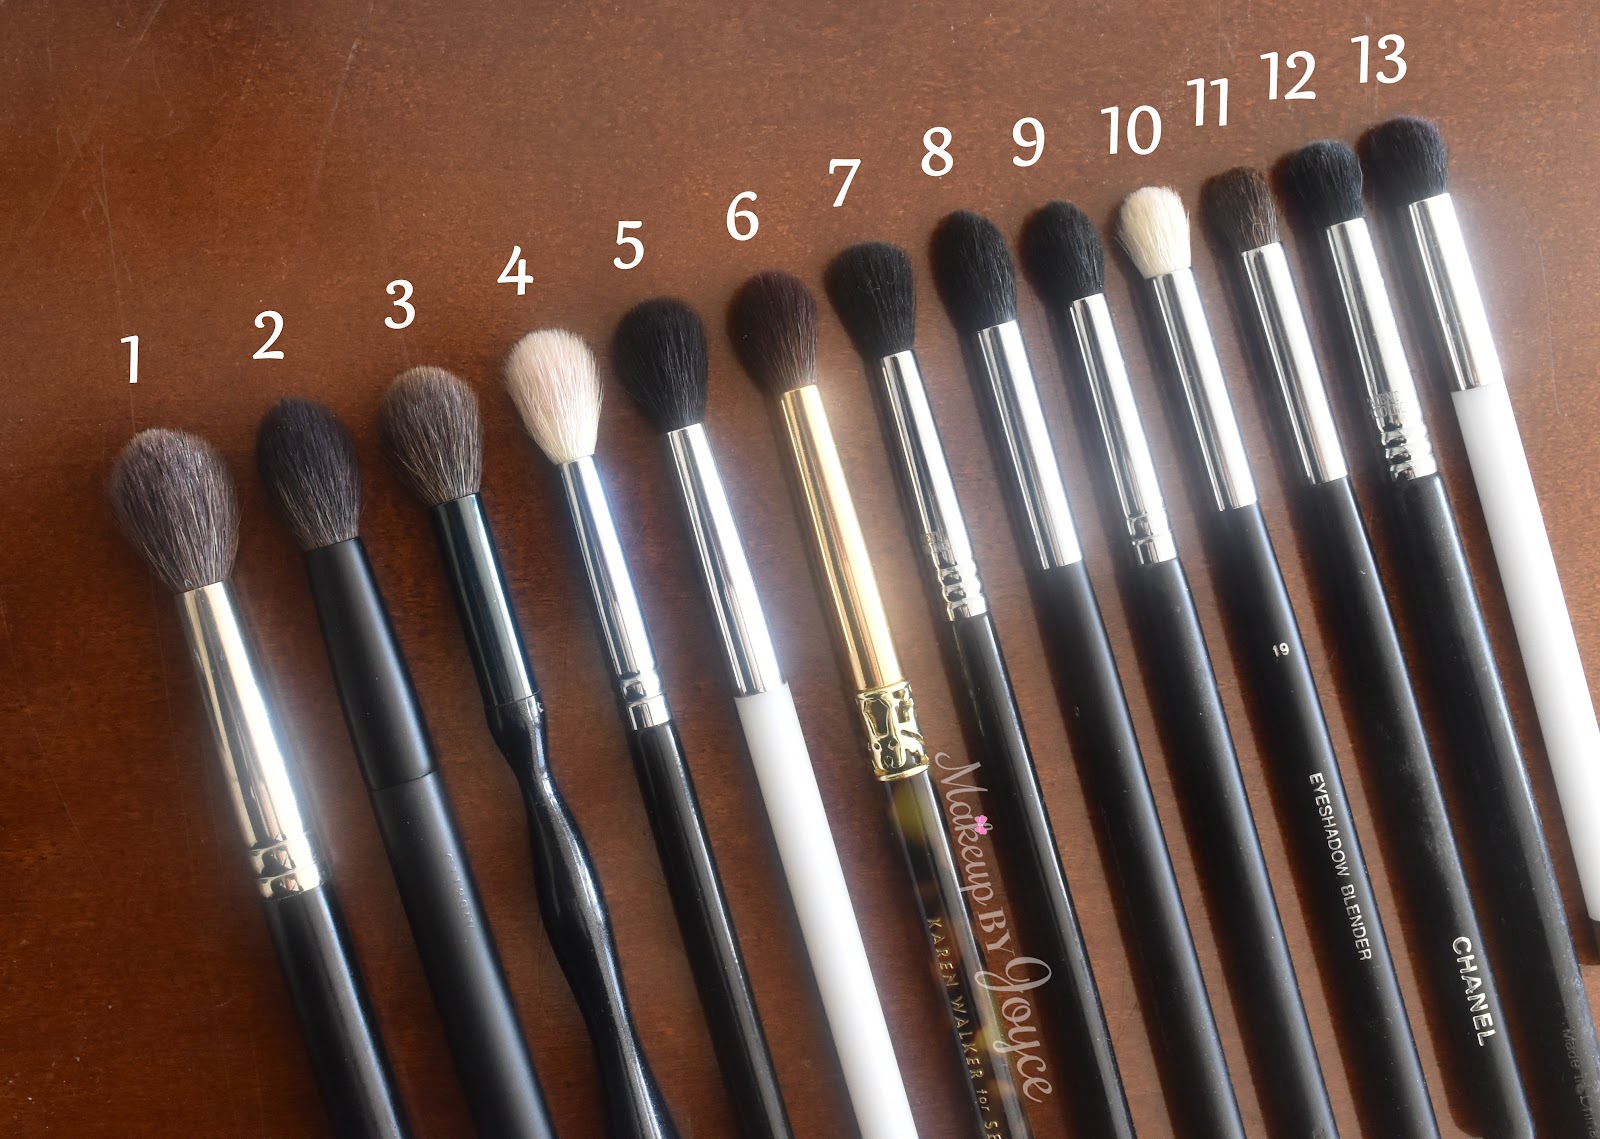 ❤ MakeupByJoyce ❤** !: Review: Tapered Crease Blending Brushes for the Eyes